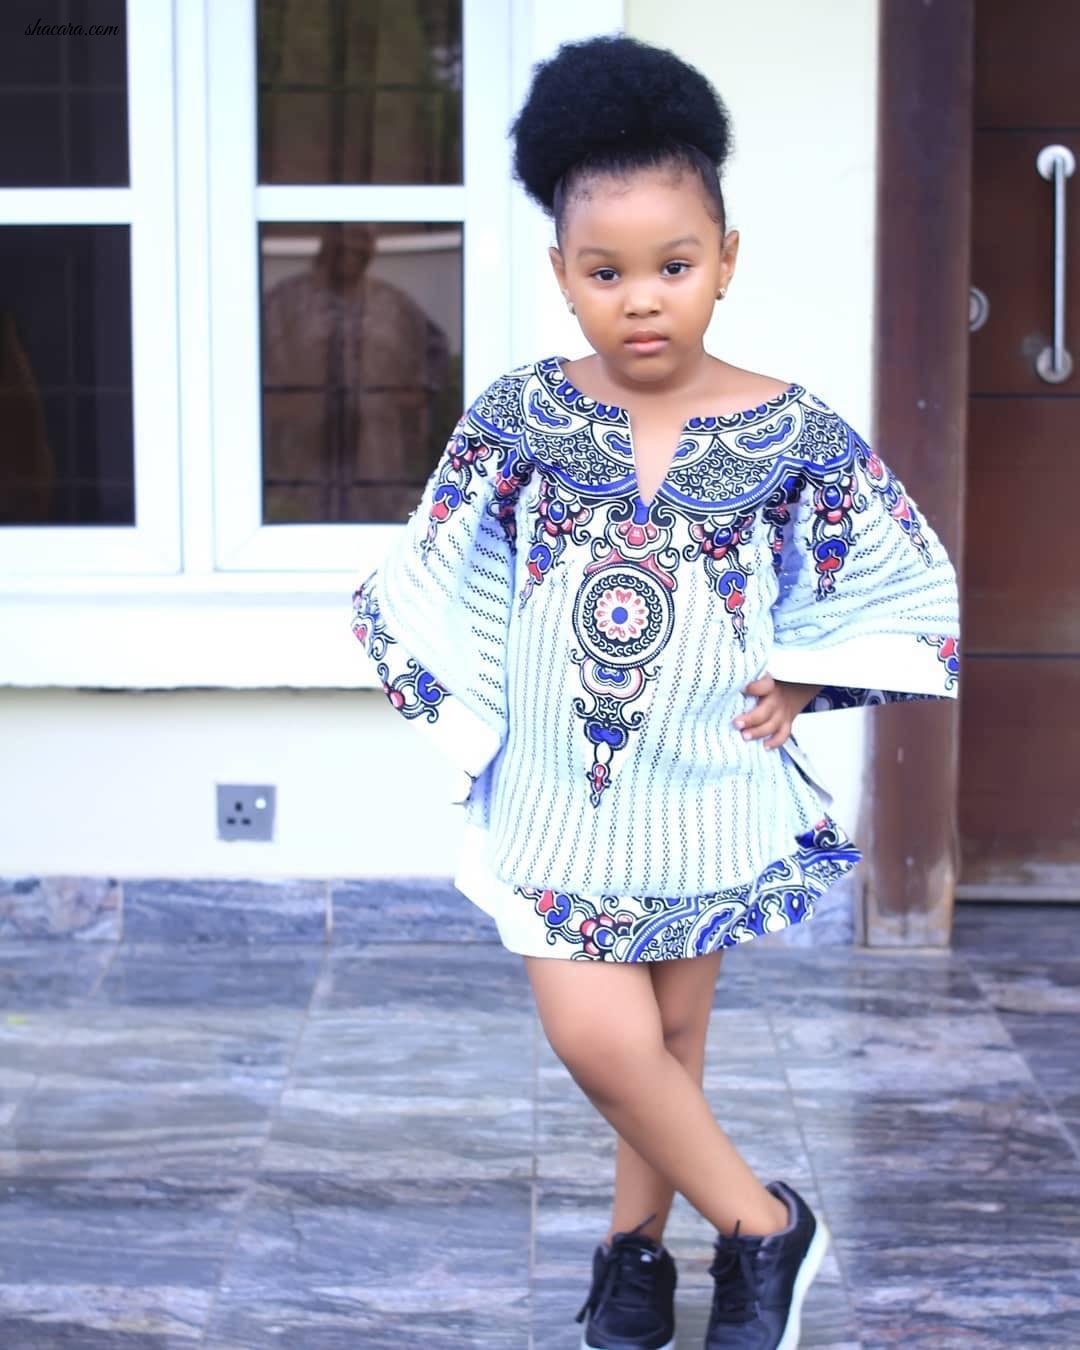 Fashion Kids Will Not Be Left This Chilly Rainy Season, Check Out These Fabulous Looks By @TeddyTeddyBaby